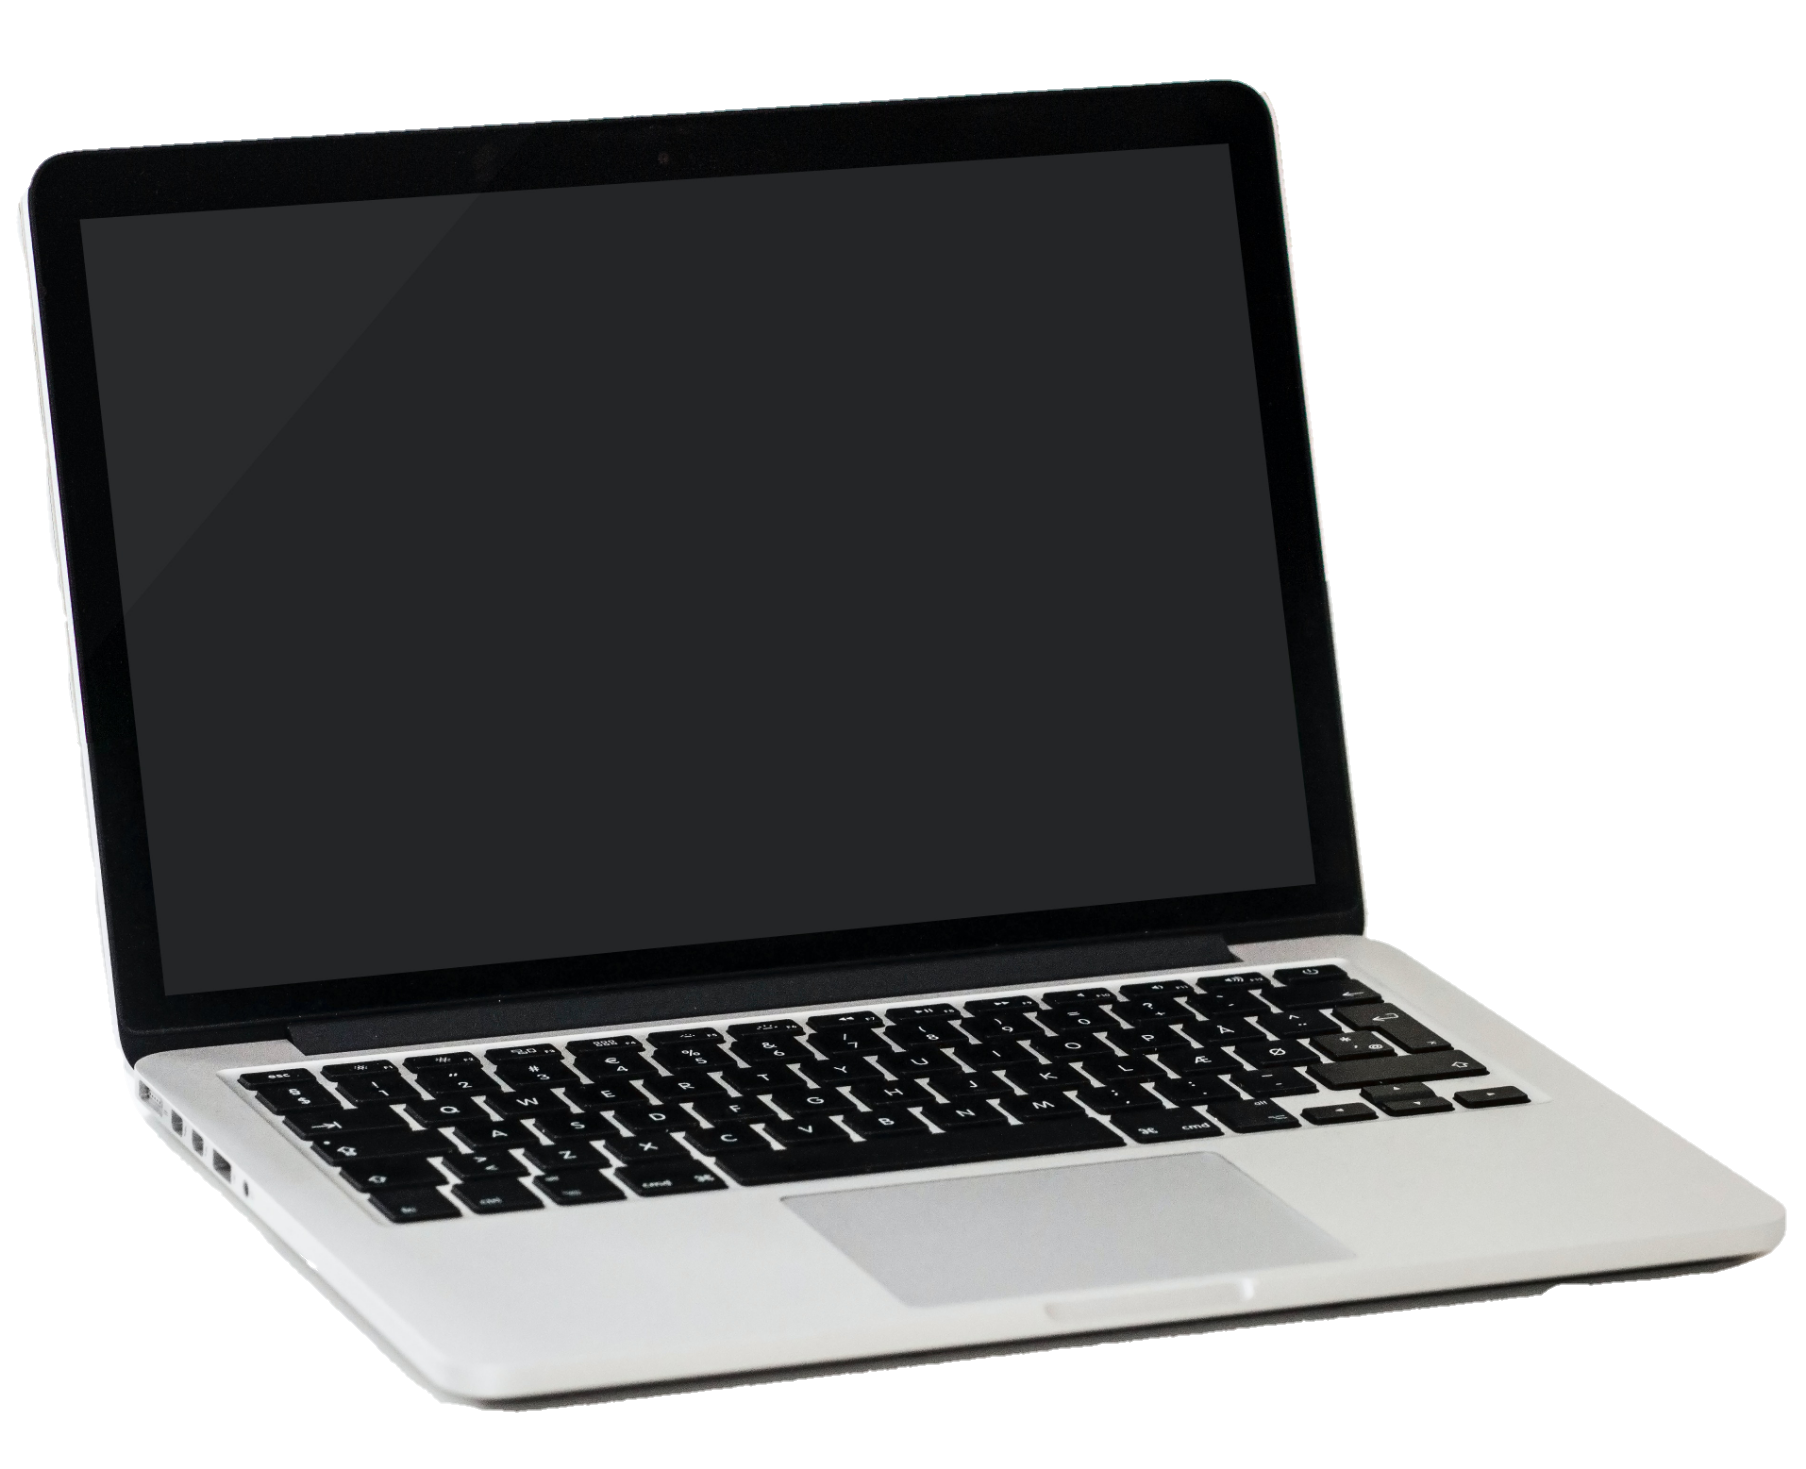 laptop-png-from-pngfre-3